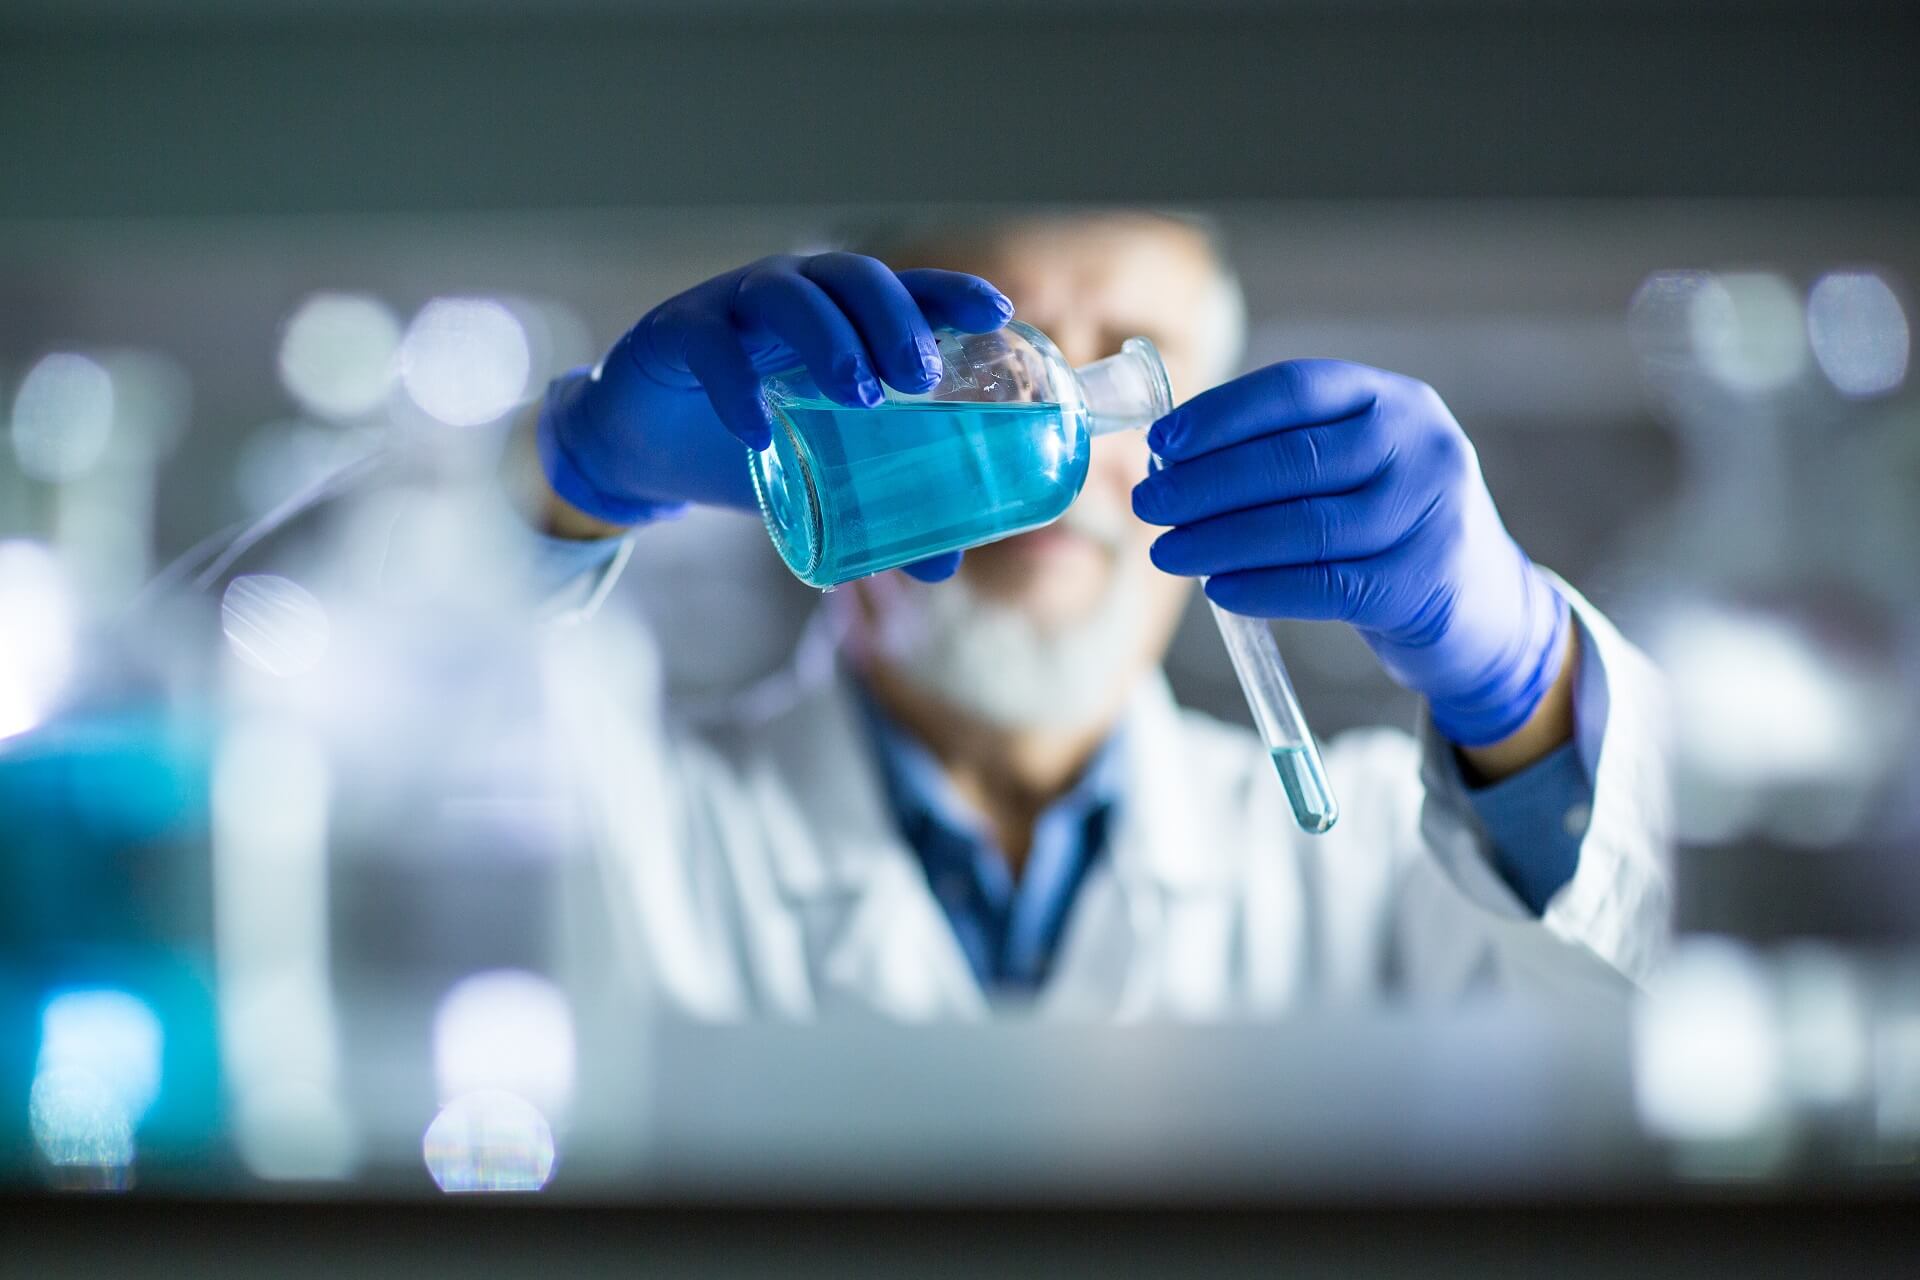 Laboratory. The man in blue gloves pours blue liquid into a test tube